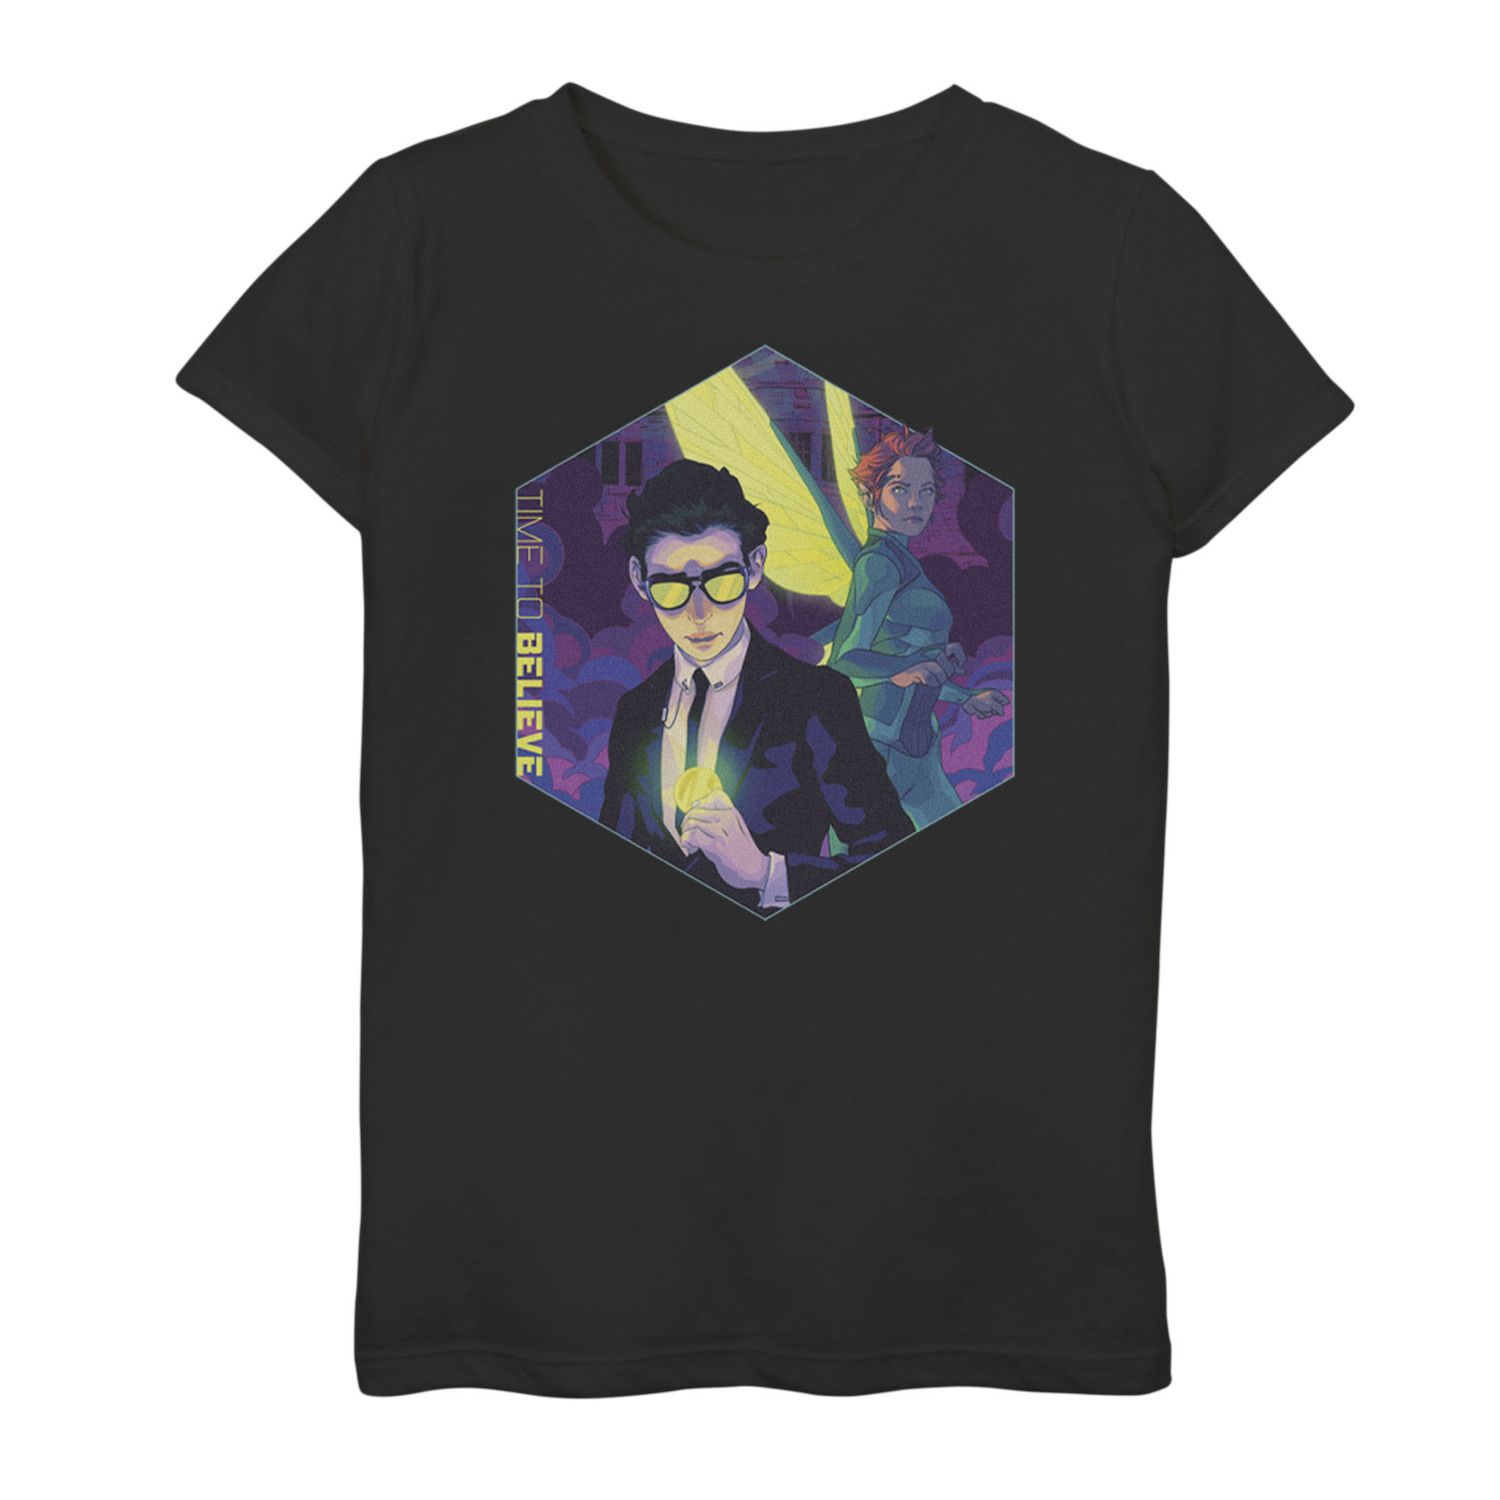 Image for Disney 's Artemis Fowl Girls 7-16 Time To Believe Graphic Tee at Kohl's.